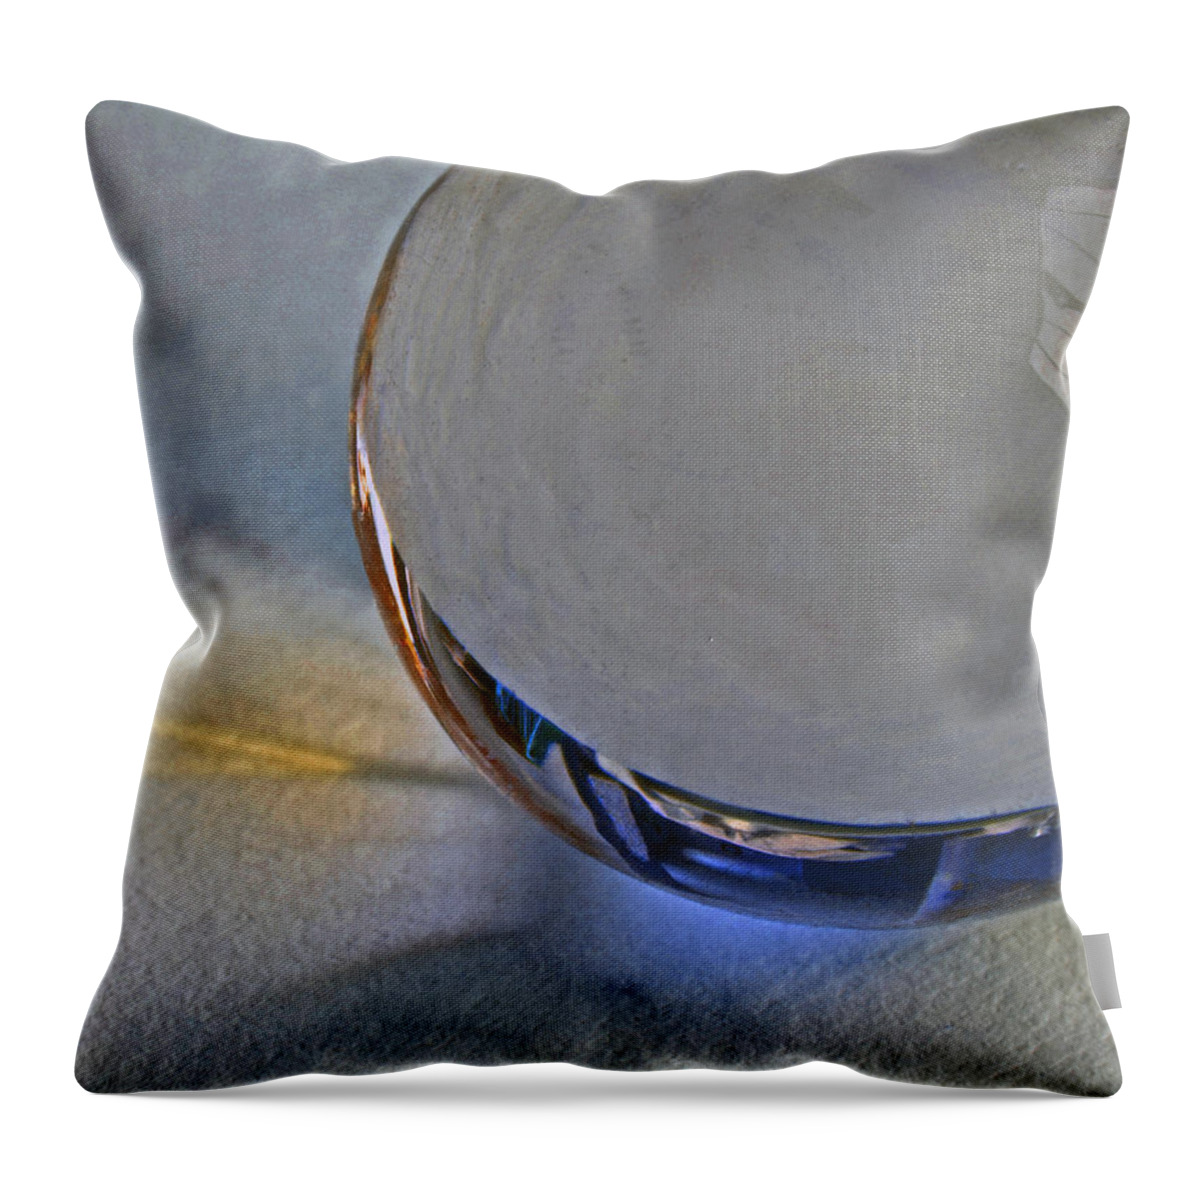 Orbs Throw Pillow featuring the photograph Radiance by Bill Owen